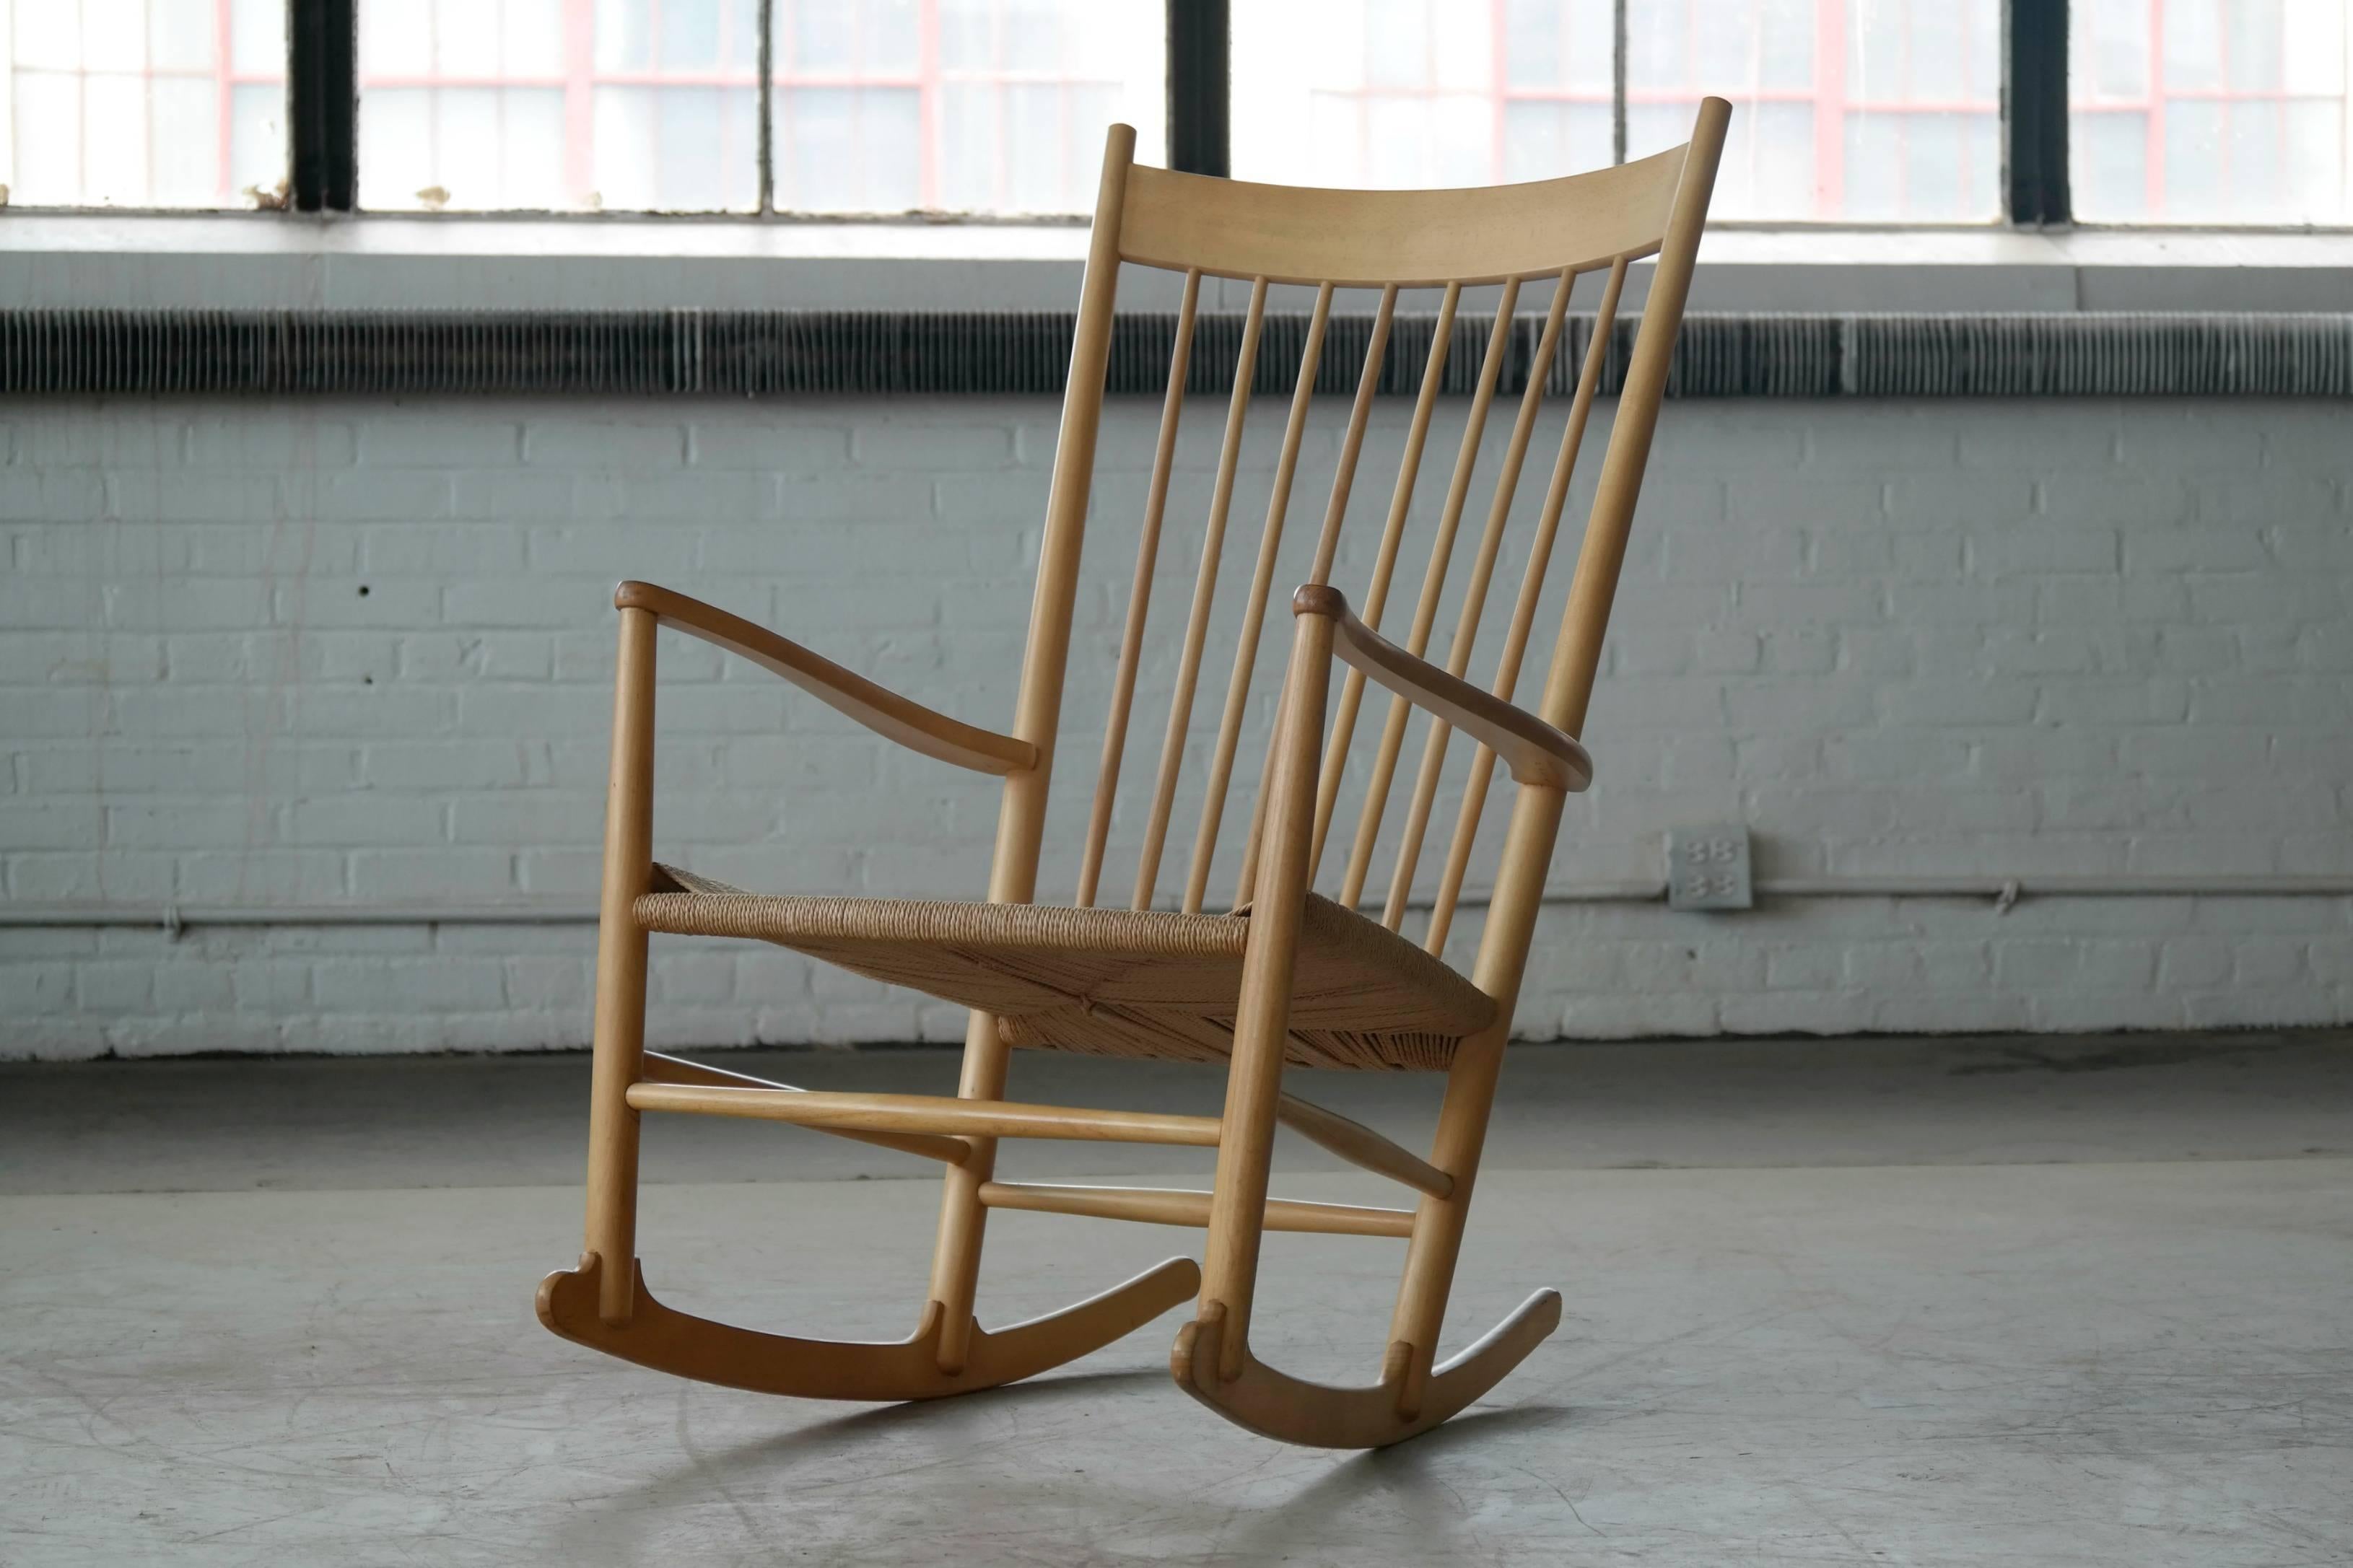 Danish Hans Wegner Rocking Chair in Beech and Papercord Made for FDB, Denmark, 1950s